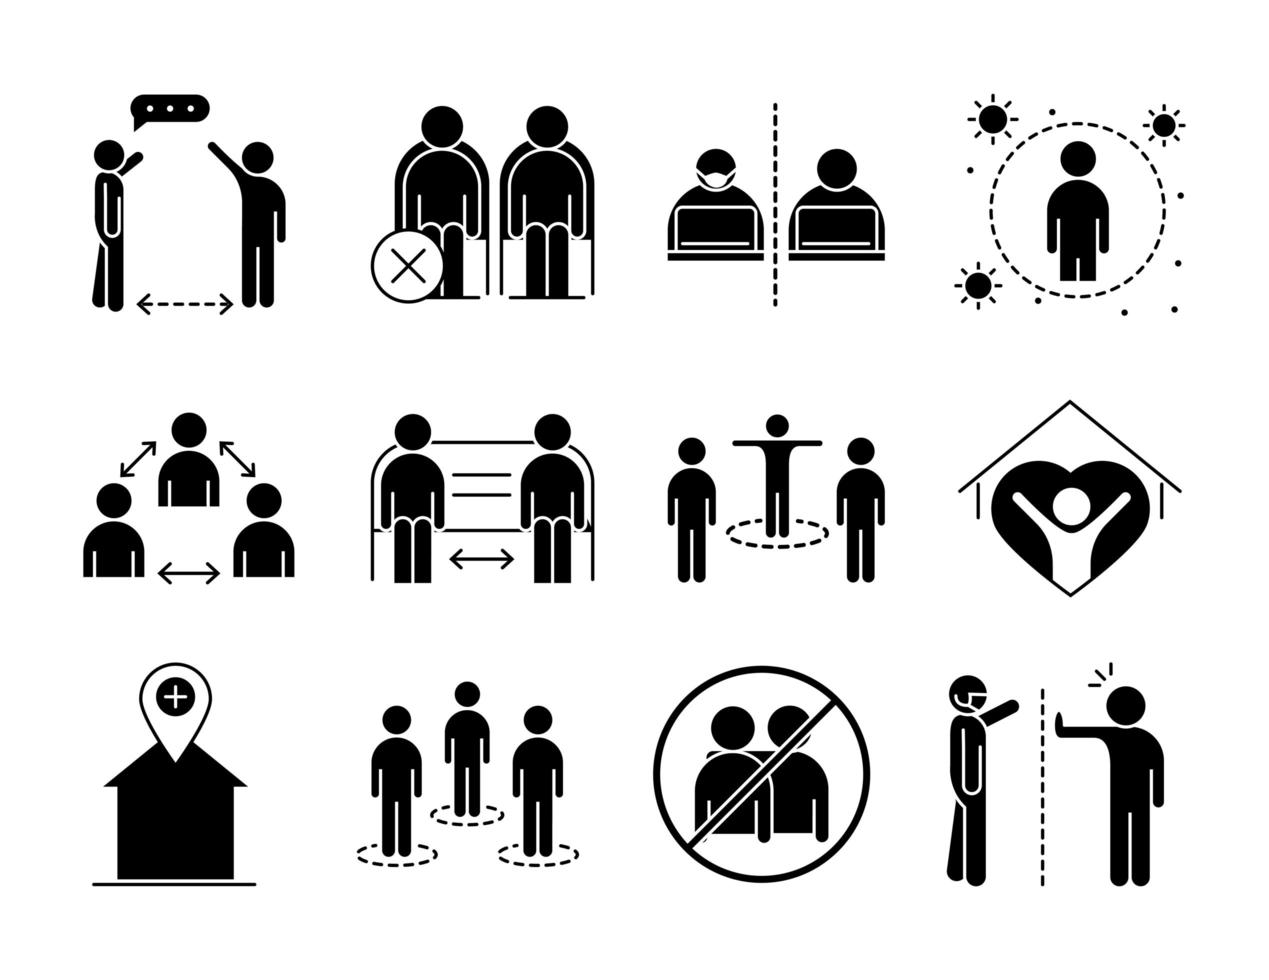 Social distance silhouette pictogram icon pack vector